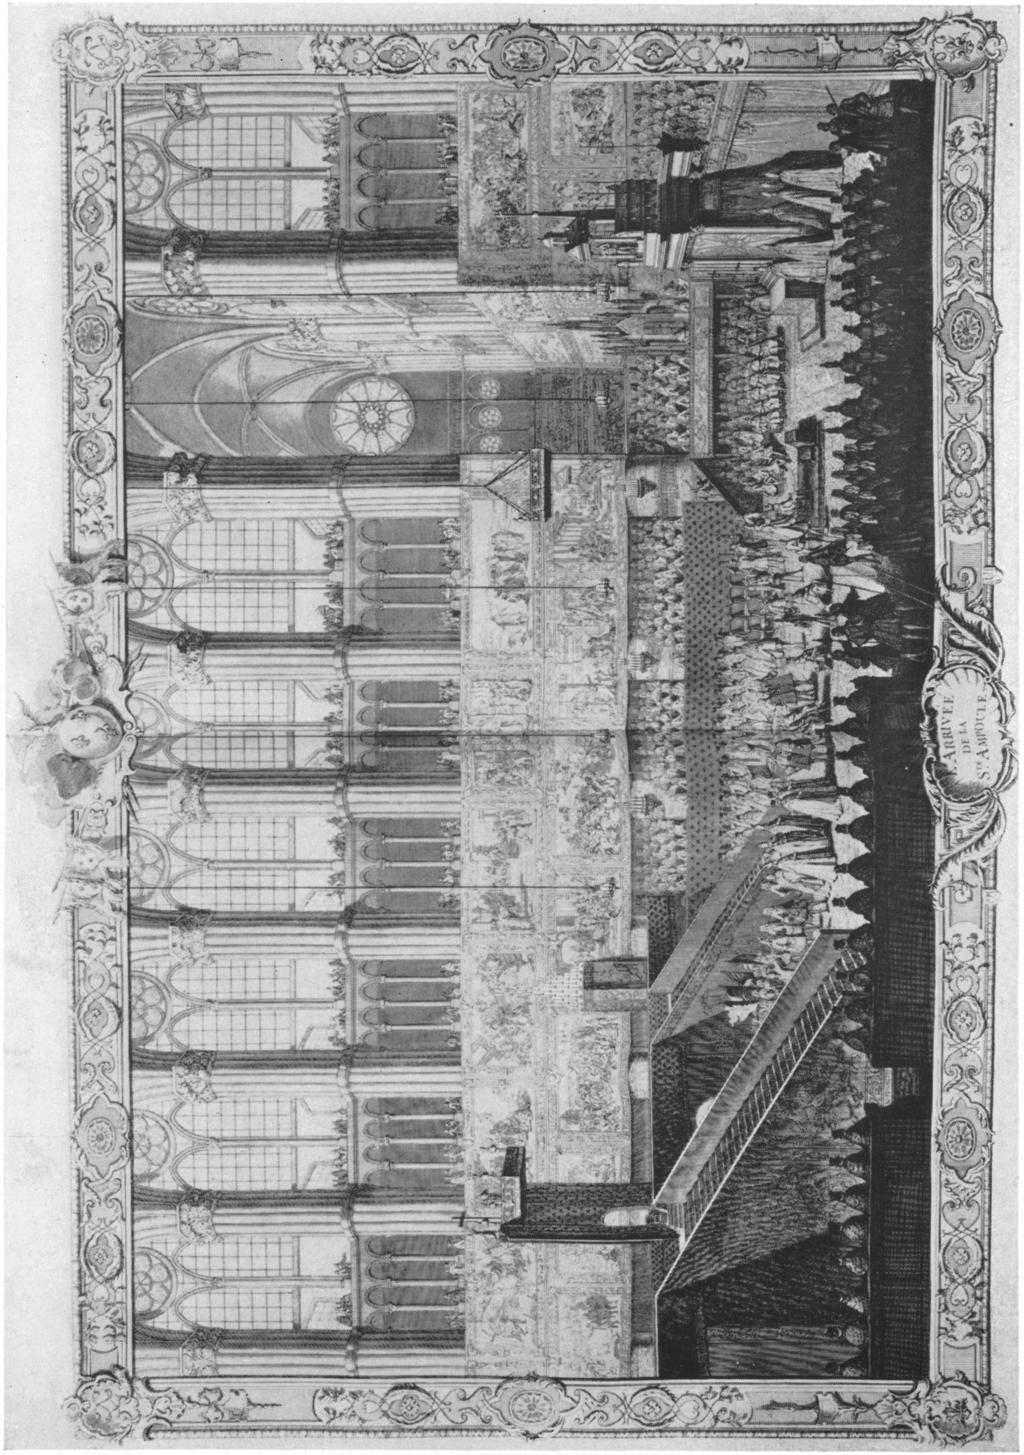 ON THESE TWO PAGES: The coronation of Louis XV in Rheims cathedral in 1722, engravings after Pierre Dulin, from